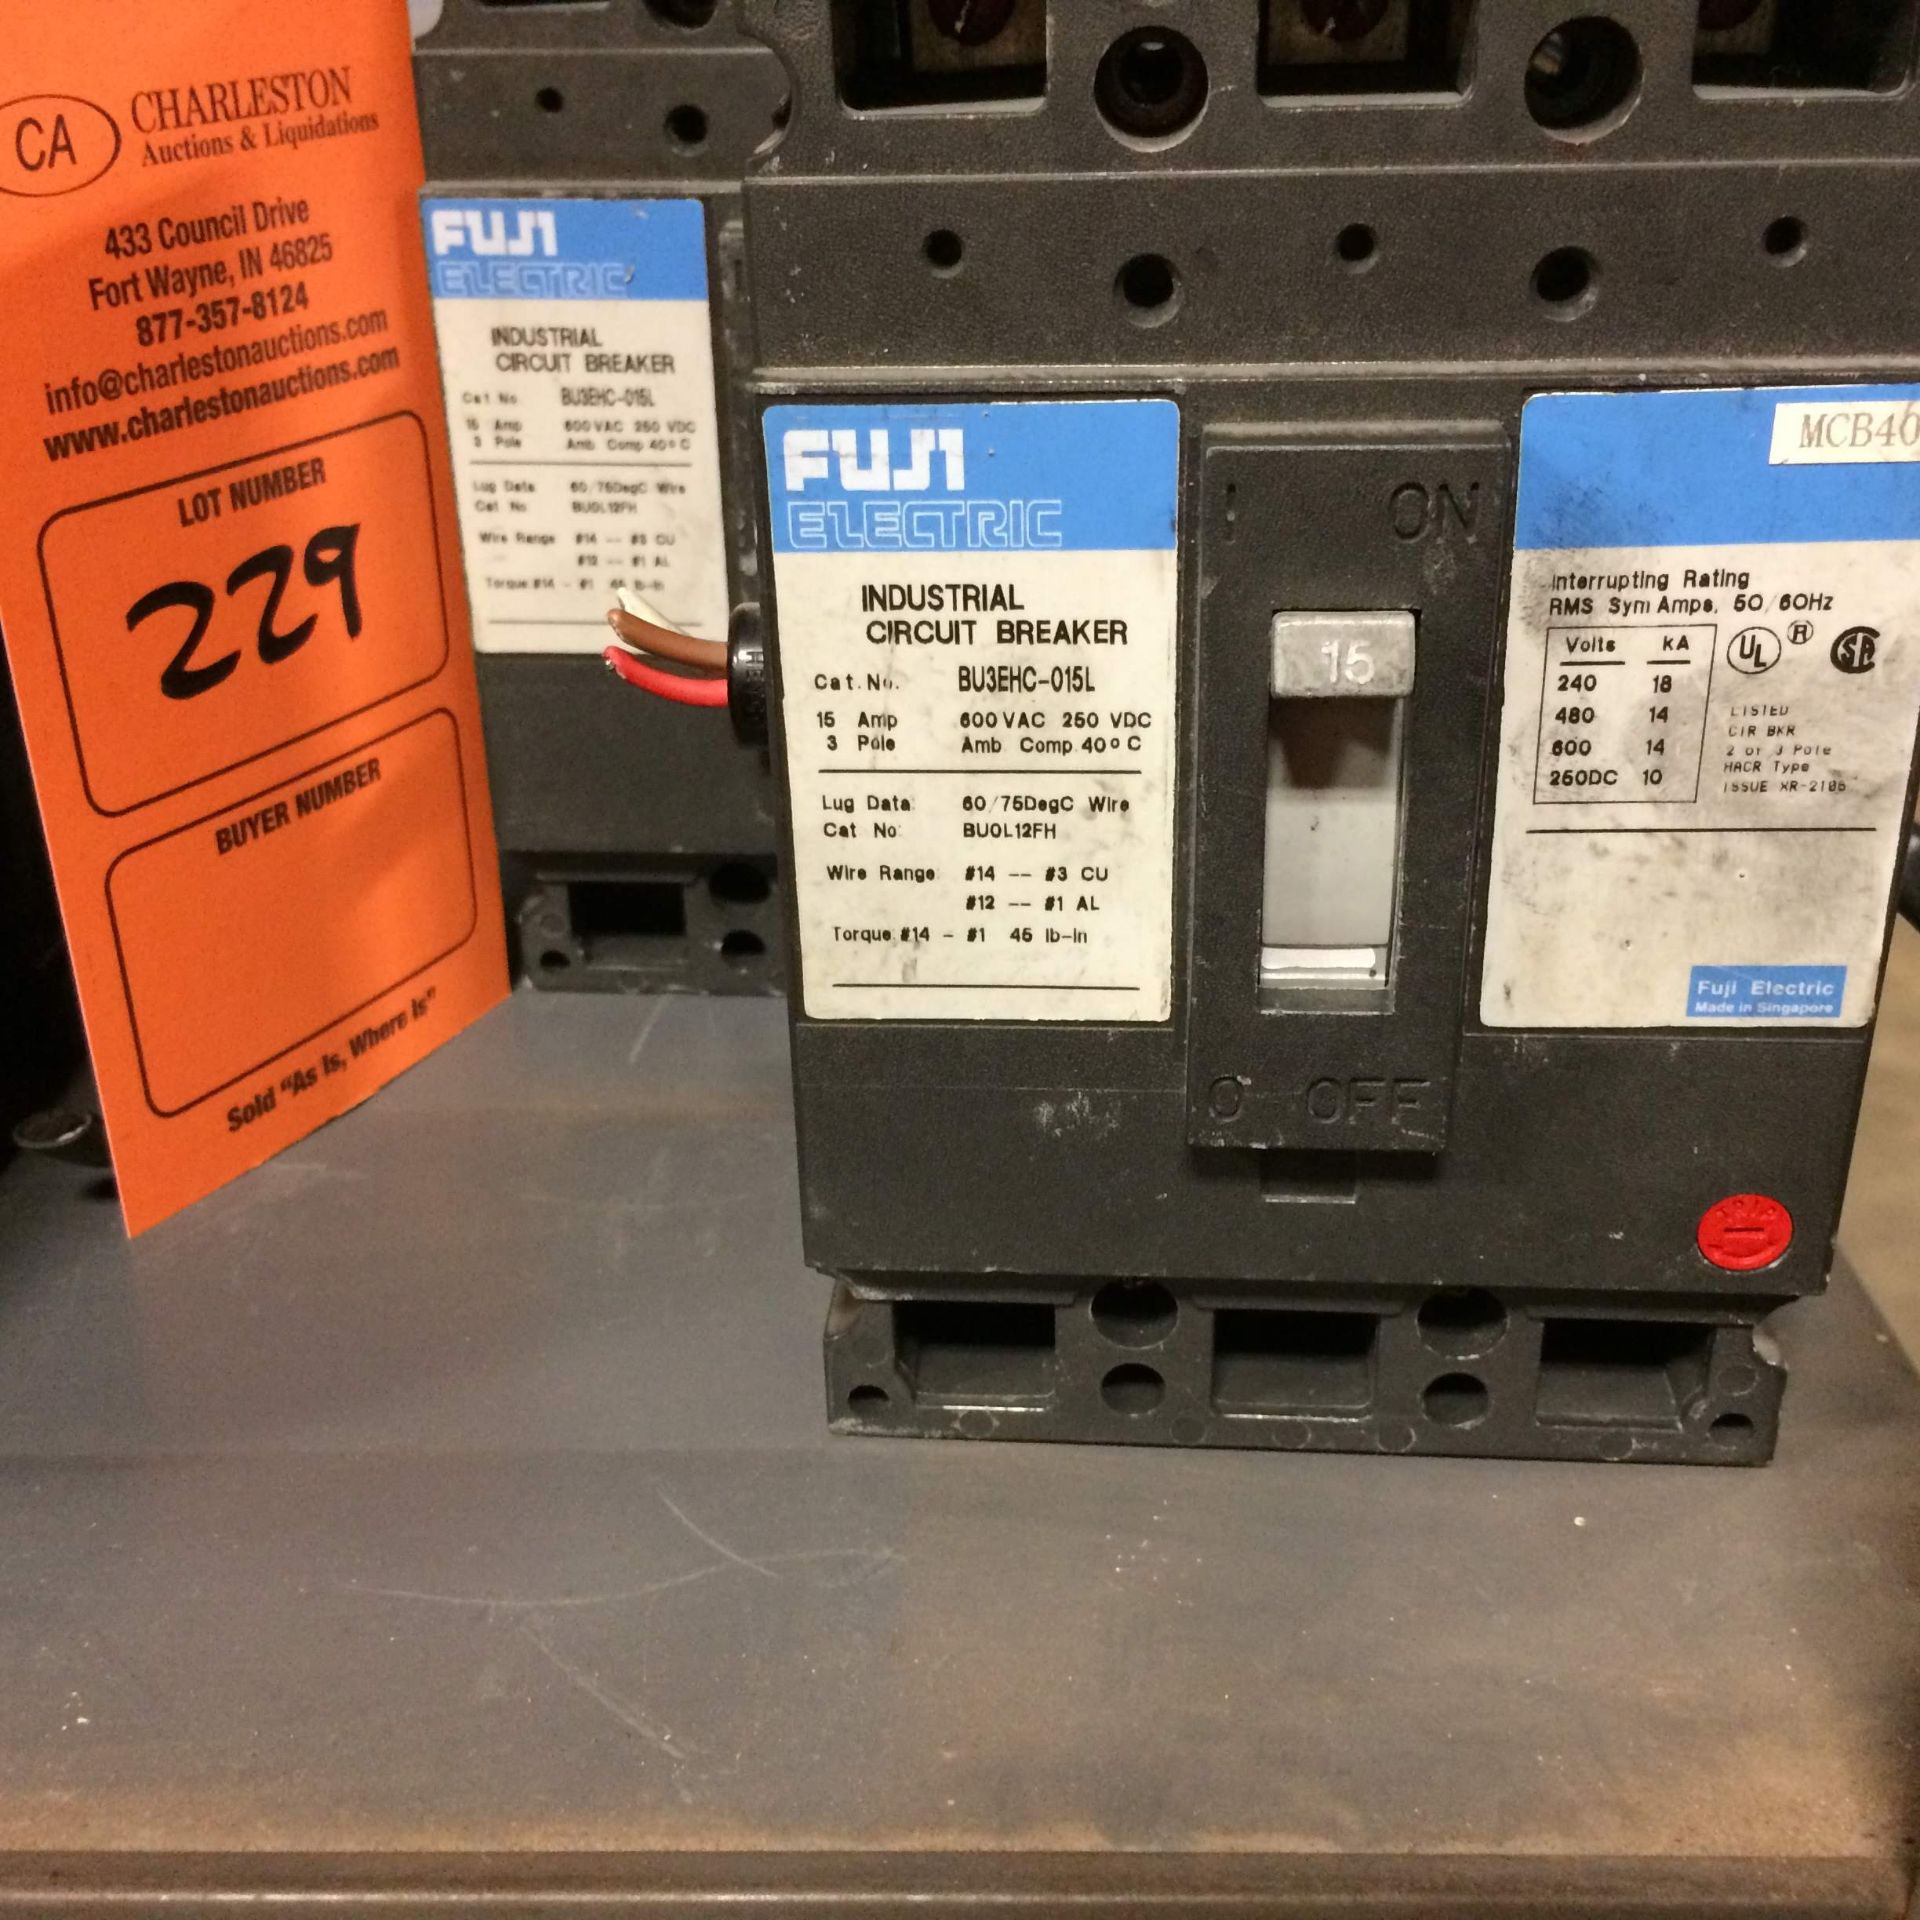 (2) BU3EHC-015L FUJI ELECTRIC INDUSTRIAL CIRCUIT BREAKER USED Pickup your lot(s) for free! - Image 2 of 5